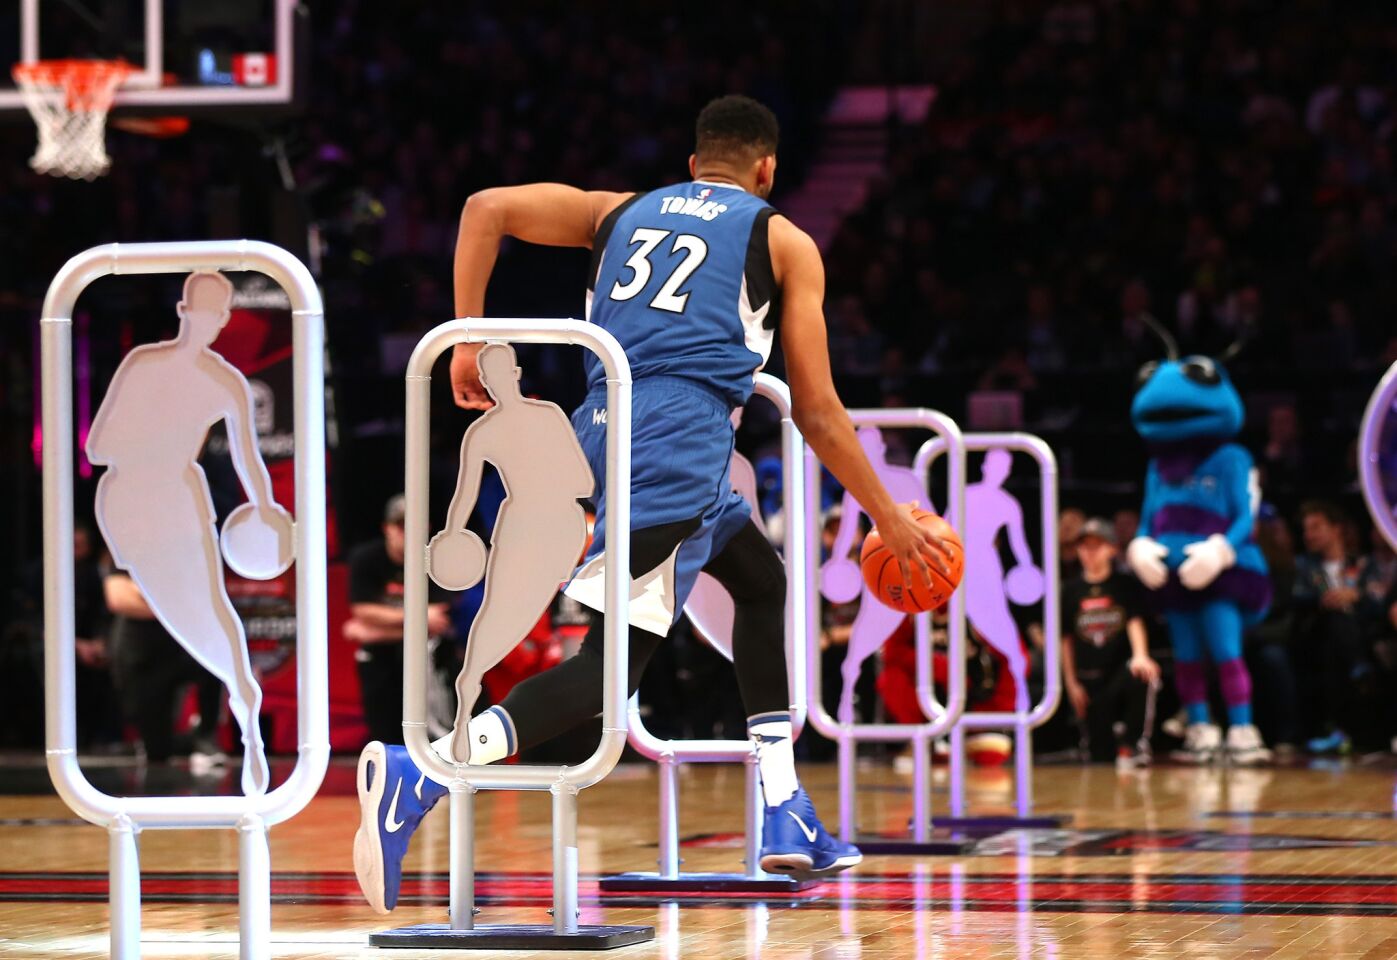 Minnesota forward Karl-Anthony Towns weaves his way through the Skills Challenge course on Saturday.